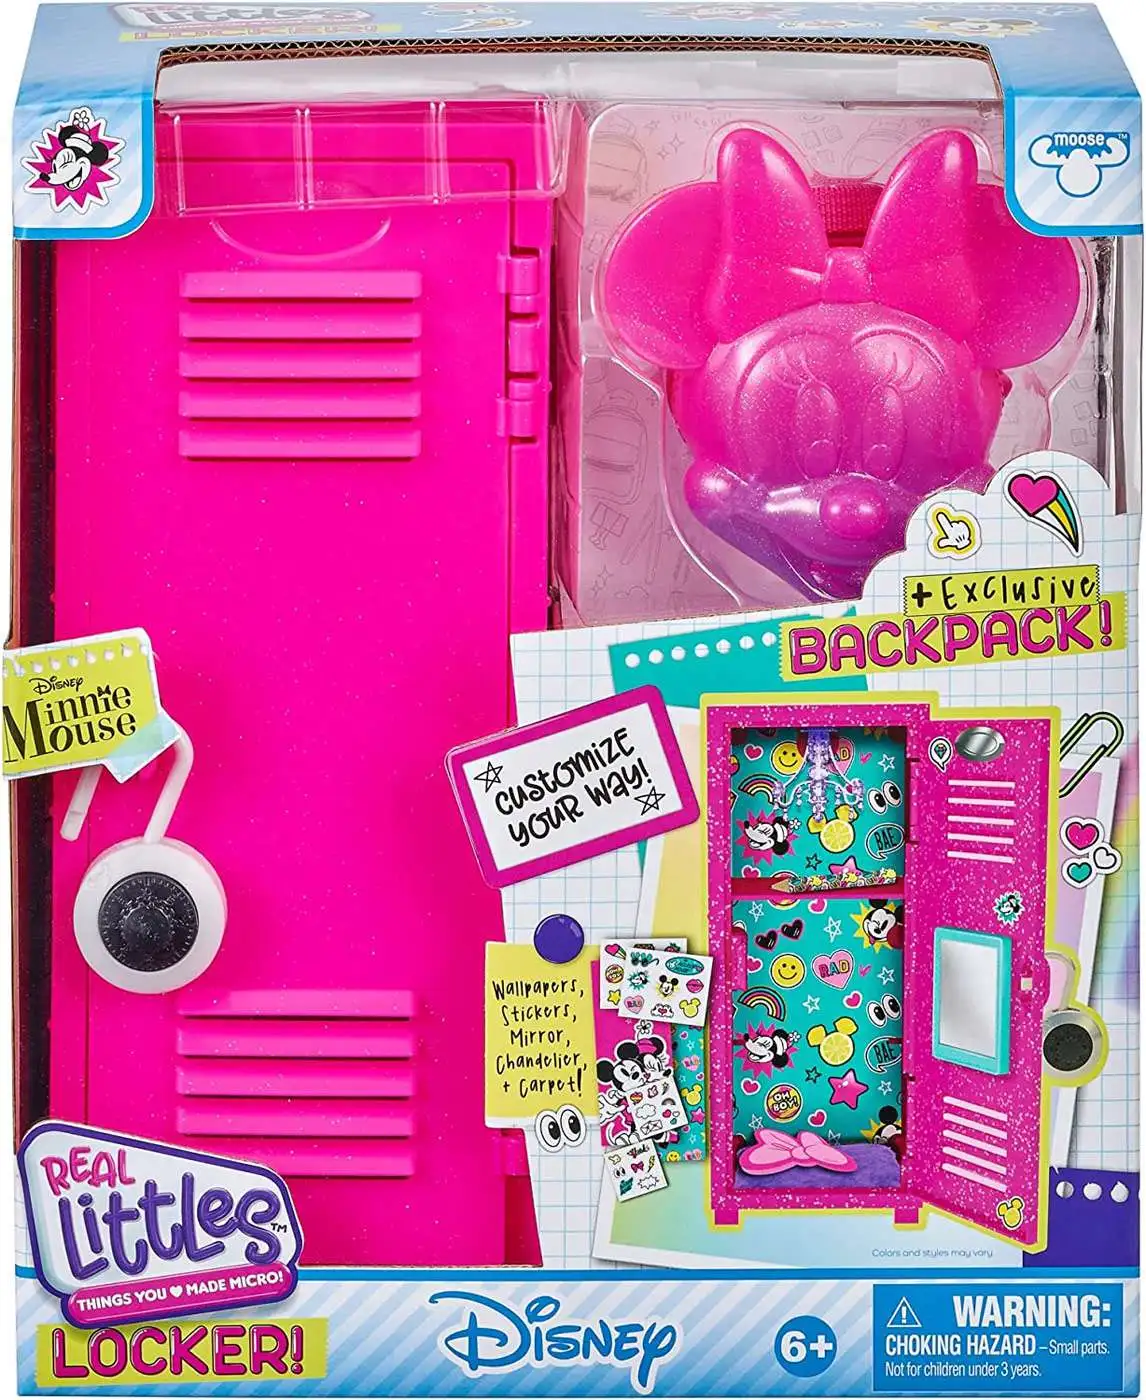 Shopkins Real Littles Disney Locker! Minnie Mouse Exclusive Mystery Pack